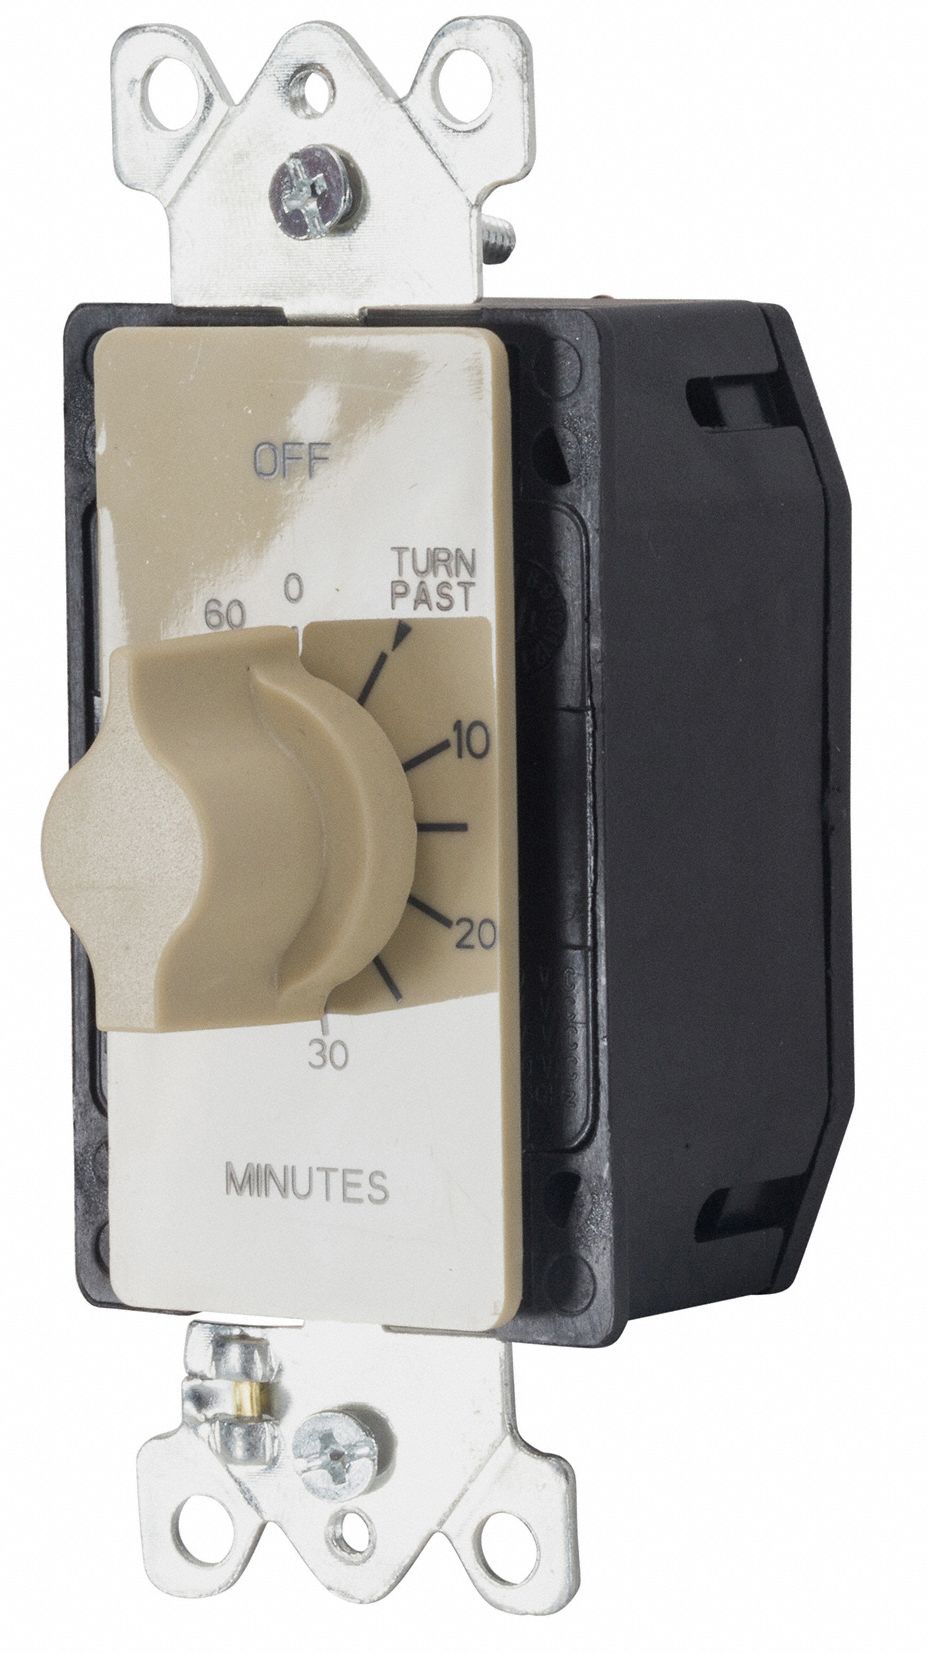 Tork A560M 60 Minute Spring Wound Timer for sale online